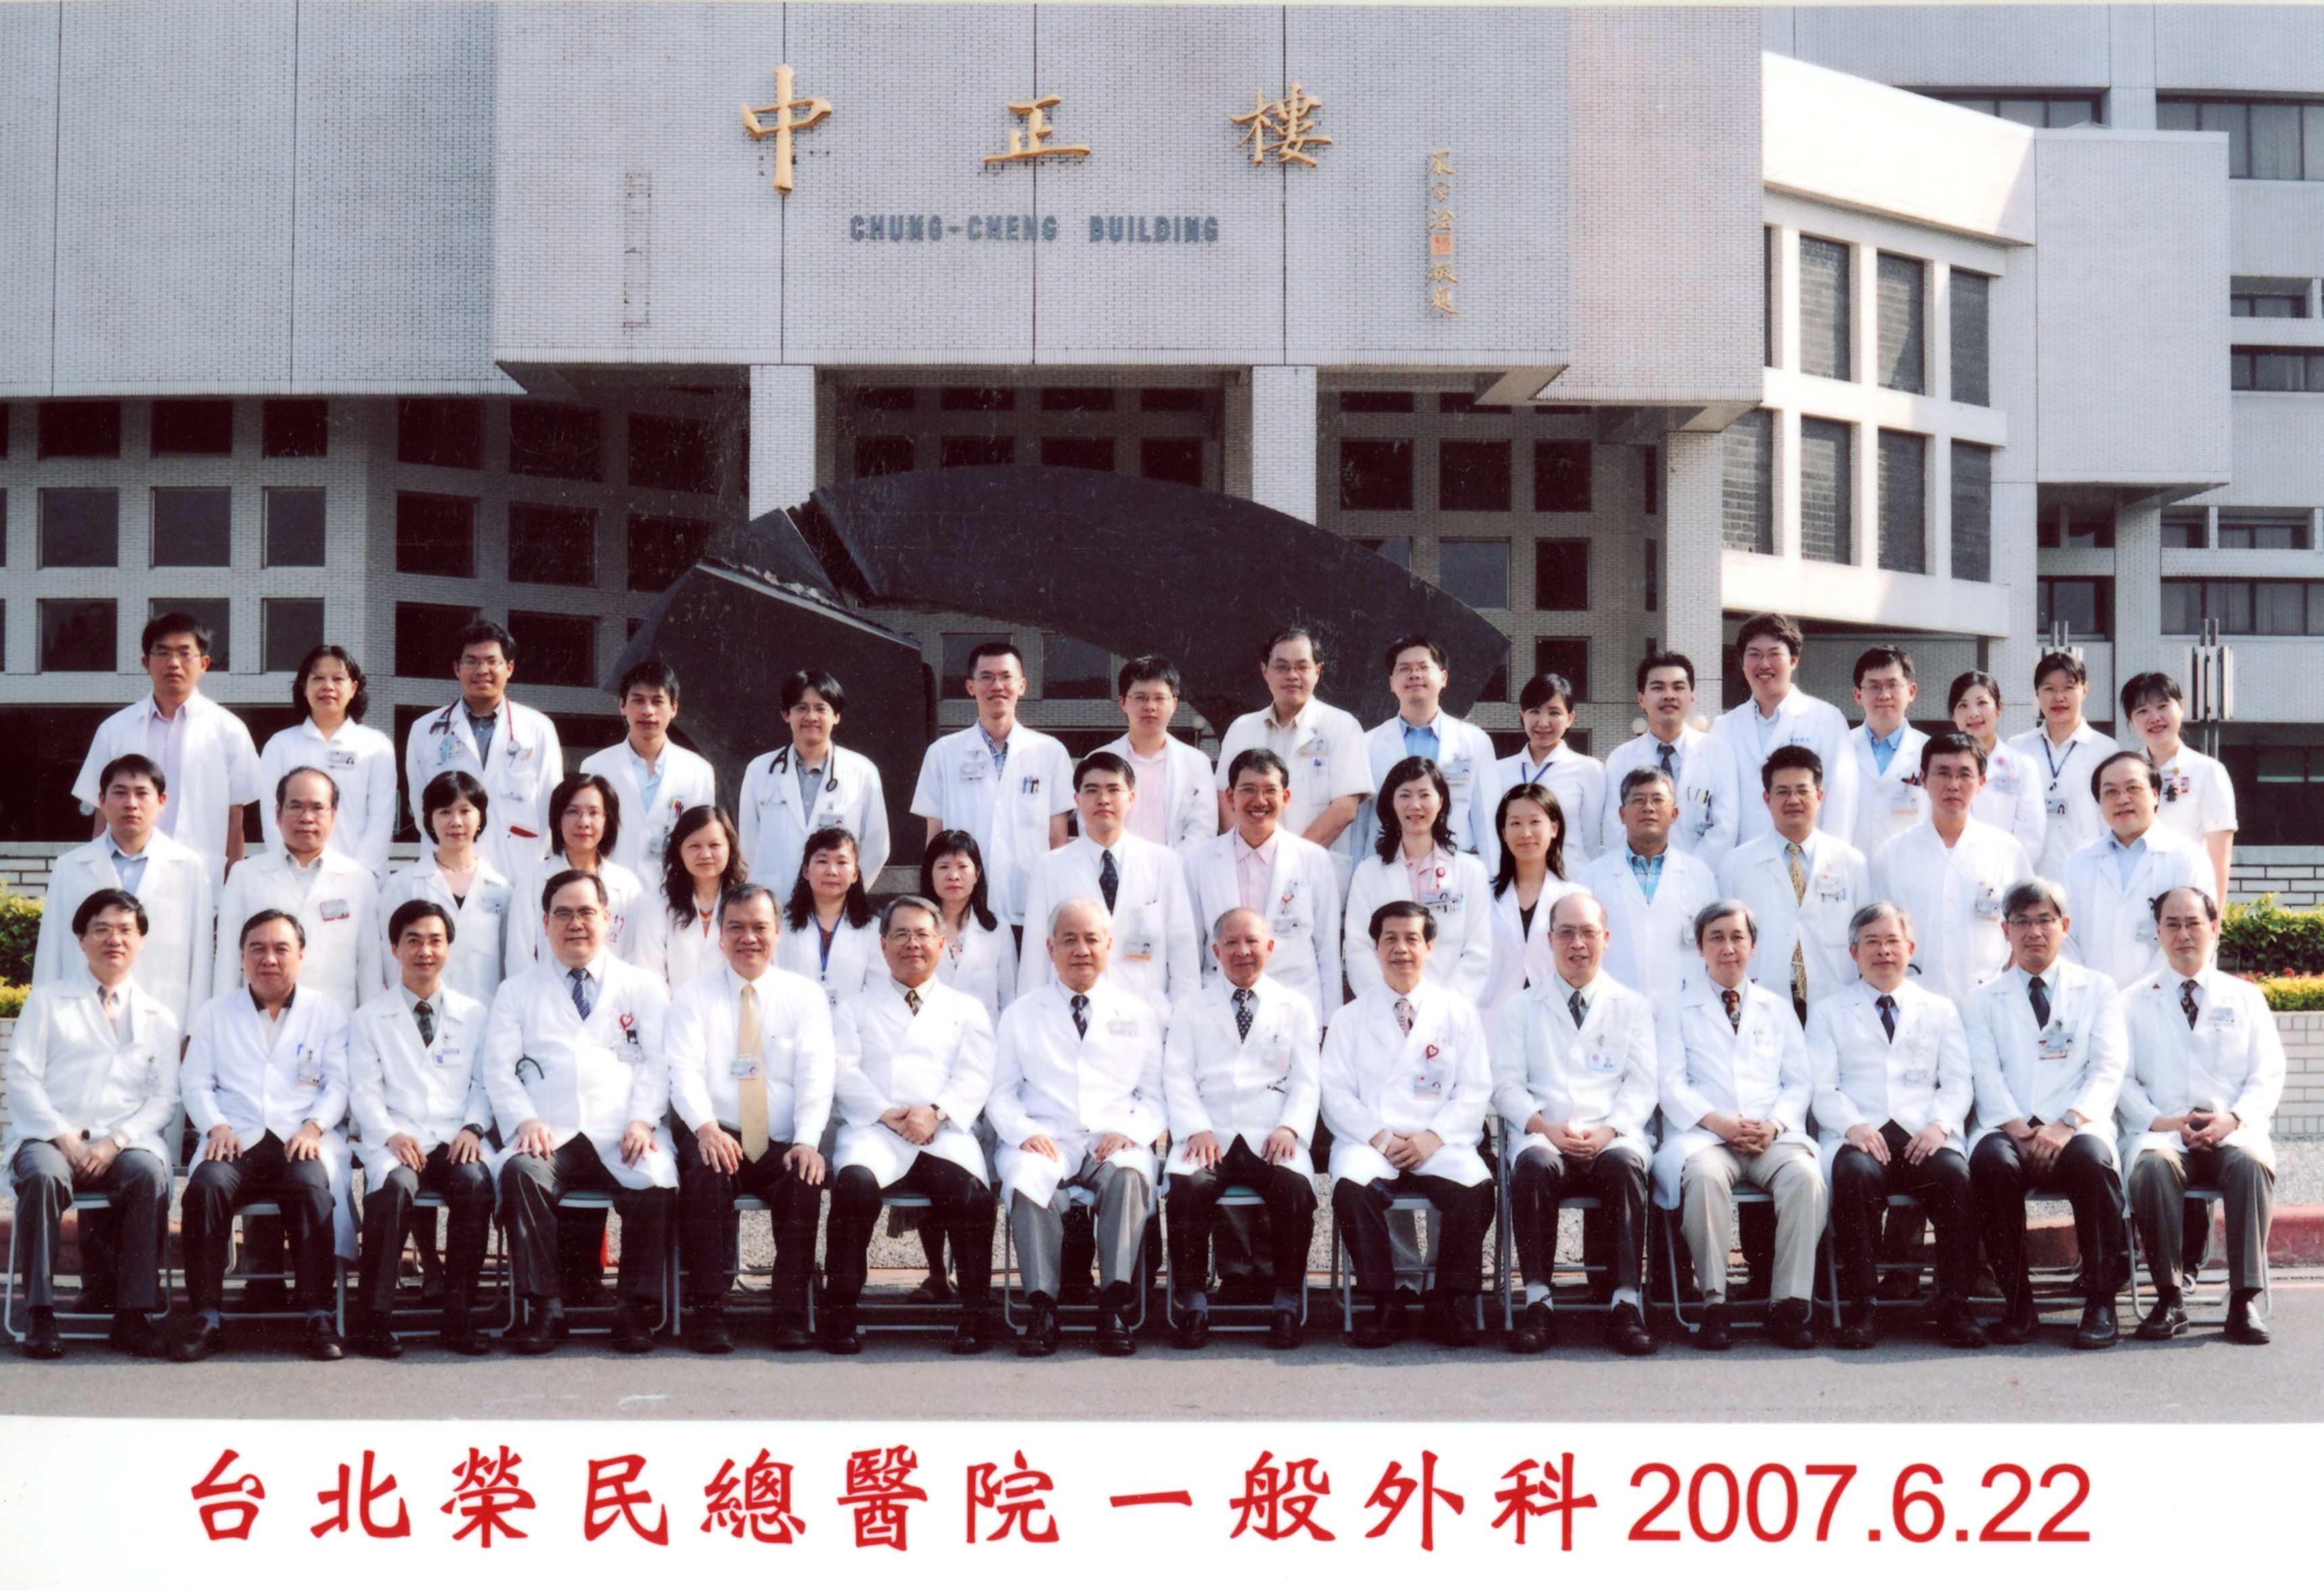 2007 general surgery Department Photo ��